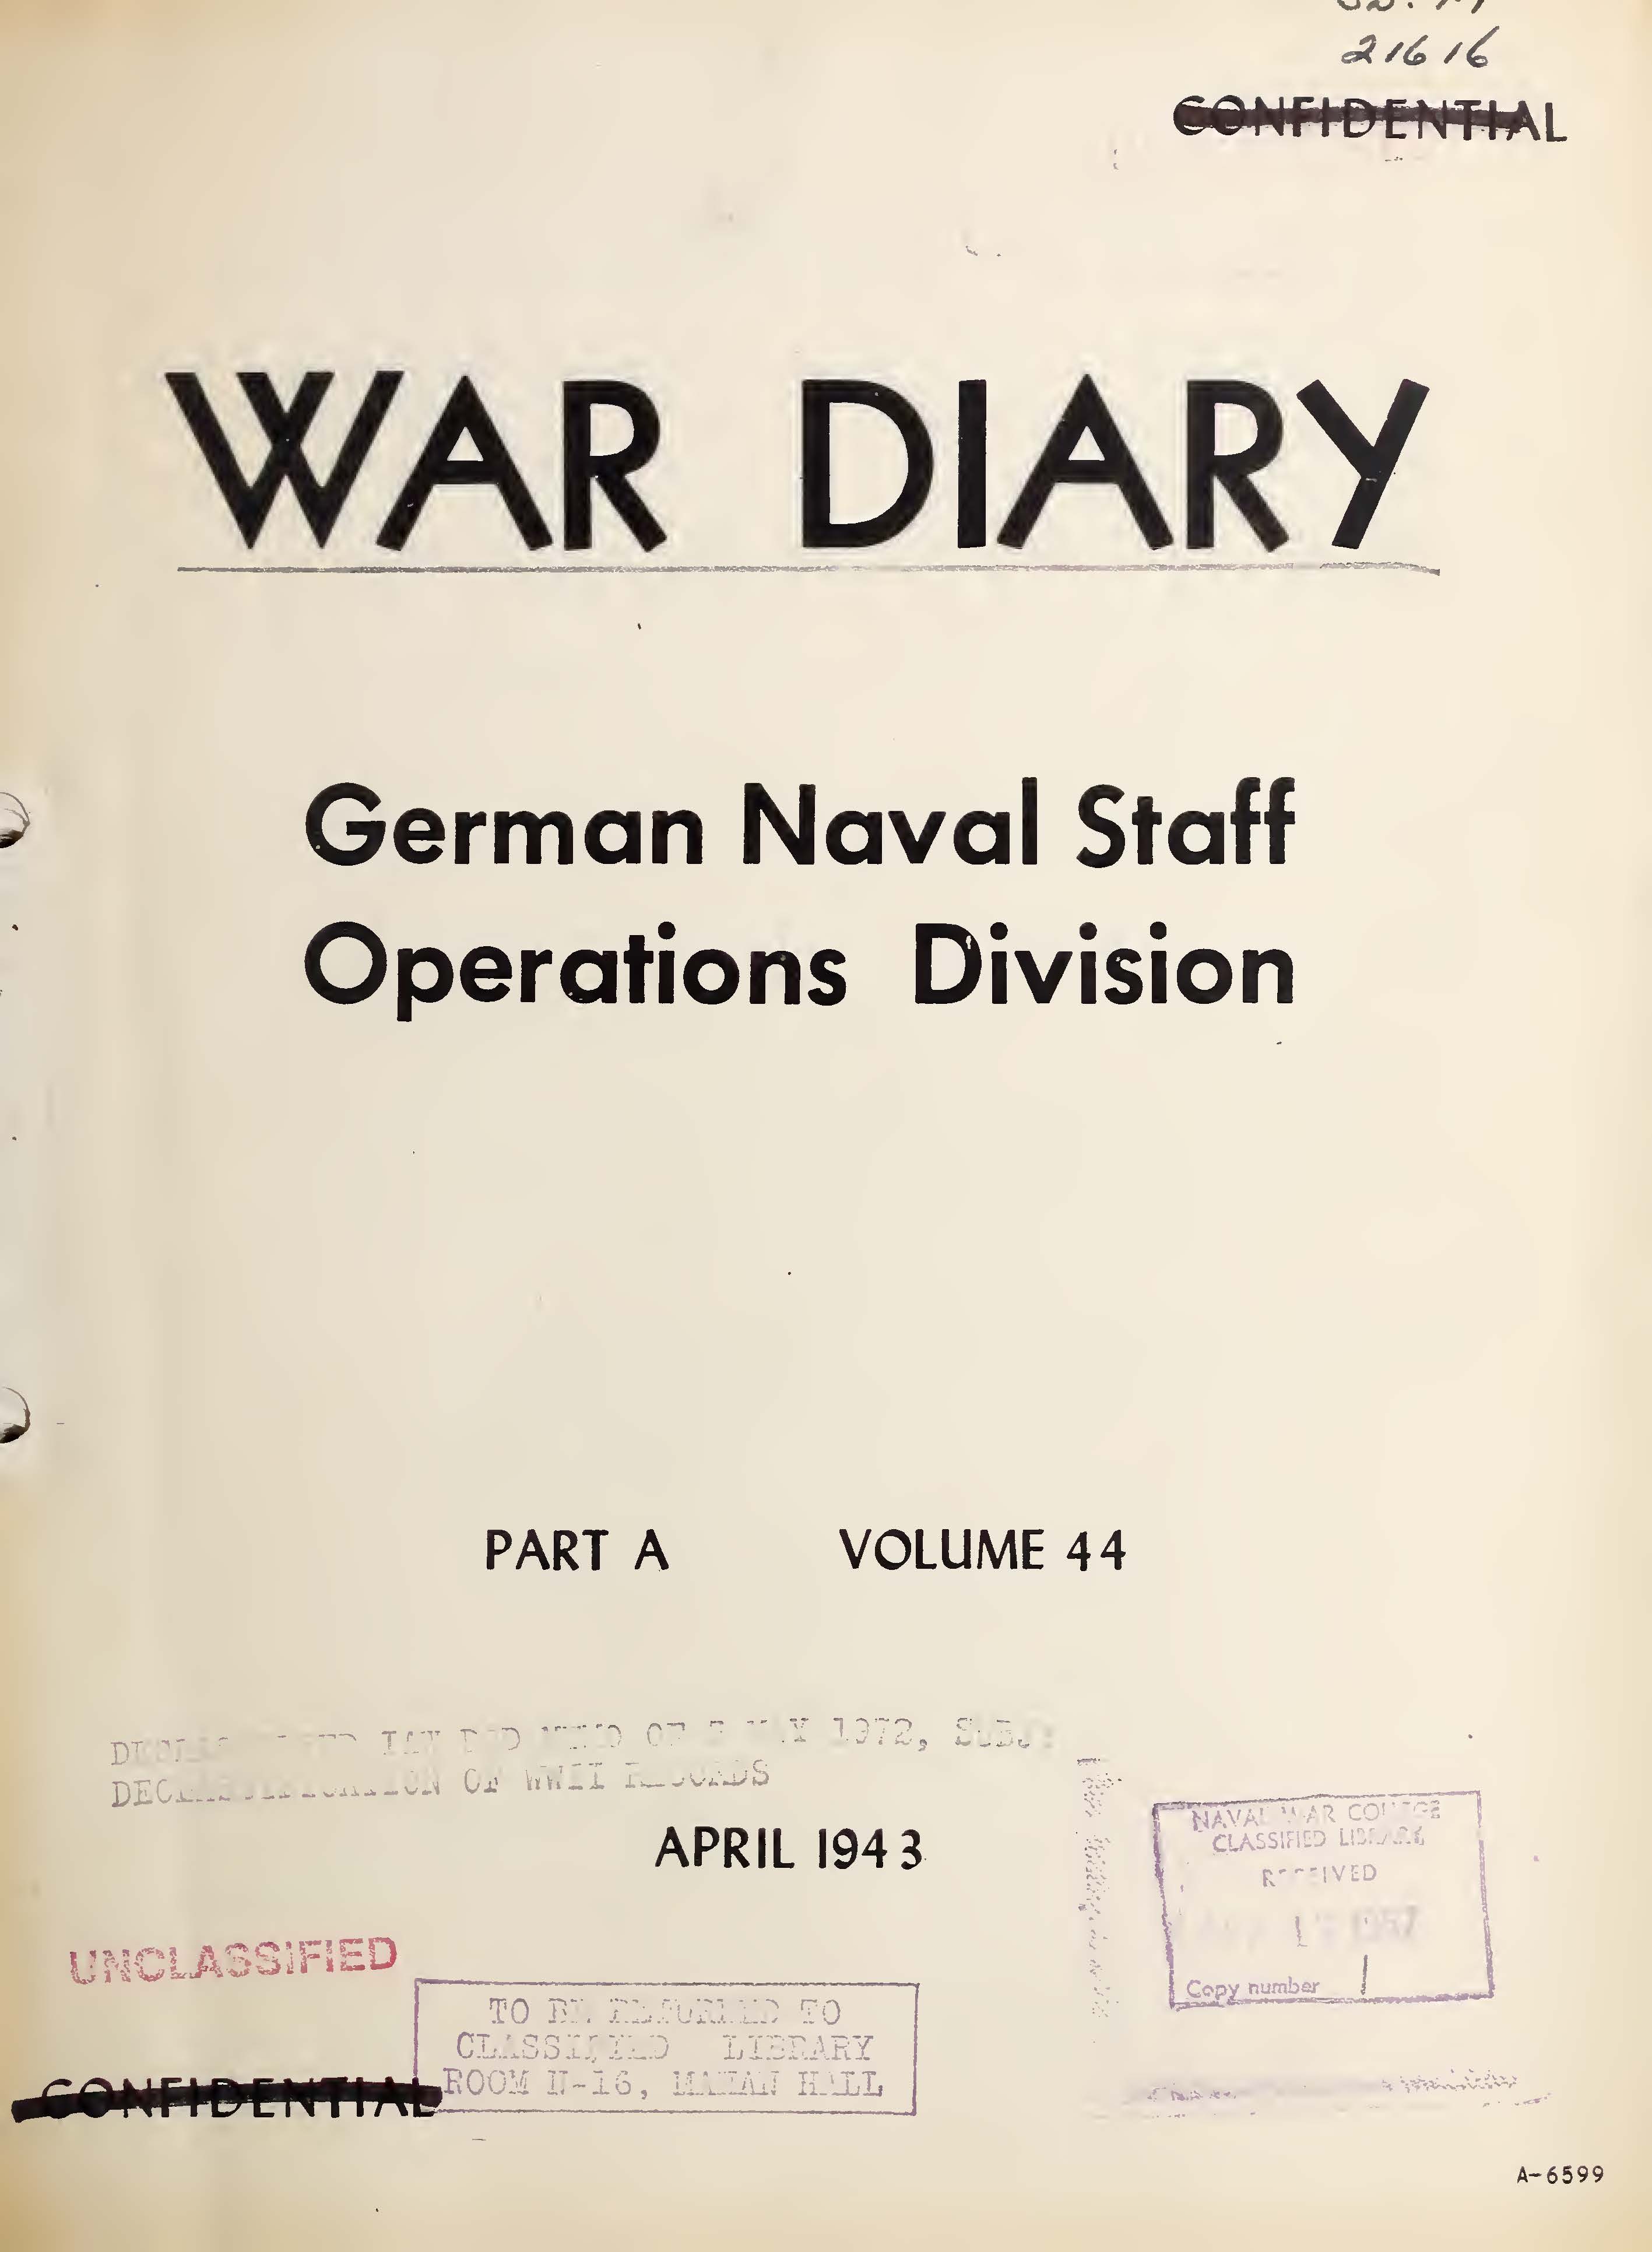 War Diary of German Naval Staff (Operations Division) Part A, Volume 44, April 1943